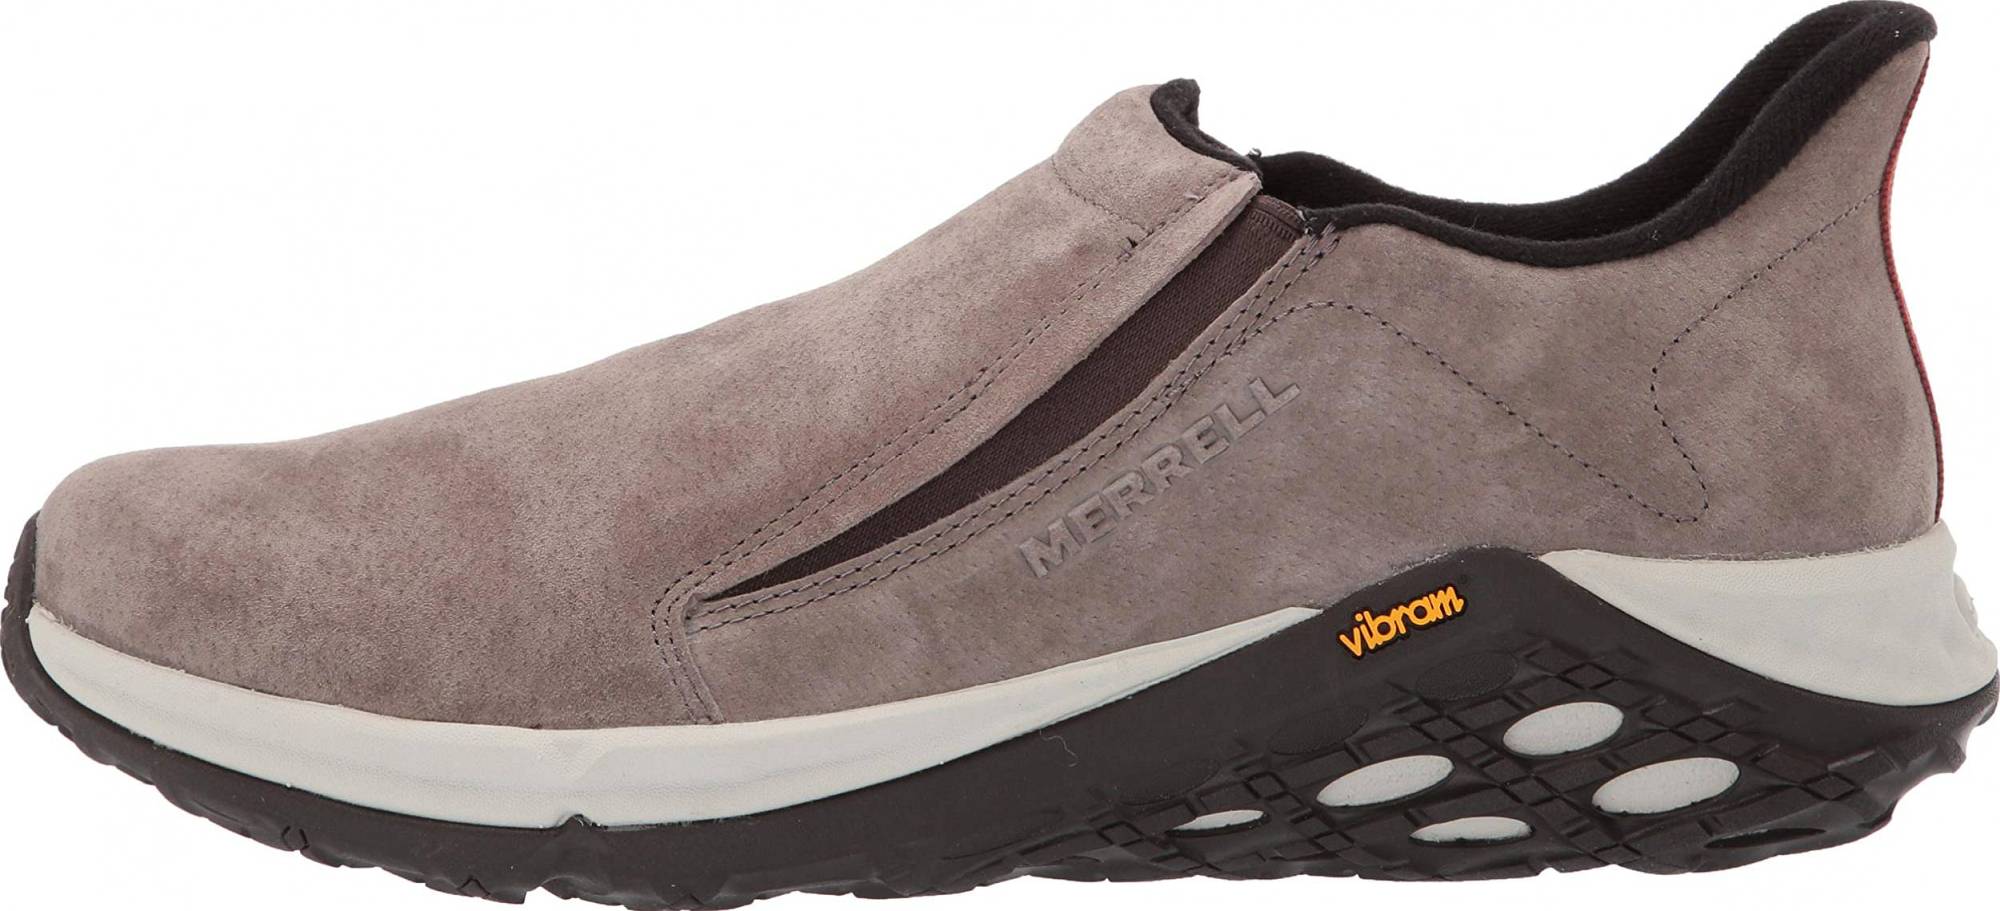 Merrell Jungle Moc 2.0 – Shoes Reviews & Reasons To Buy